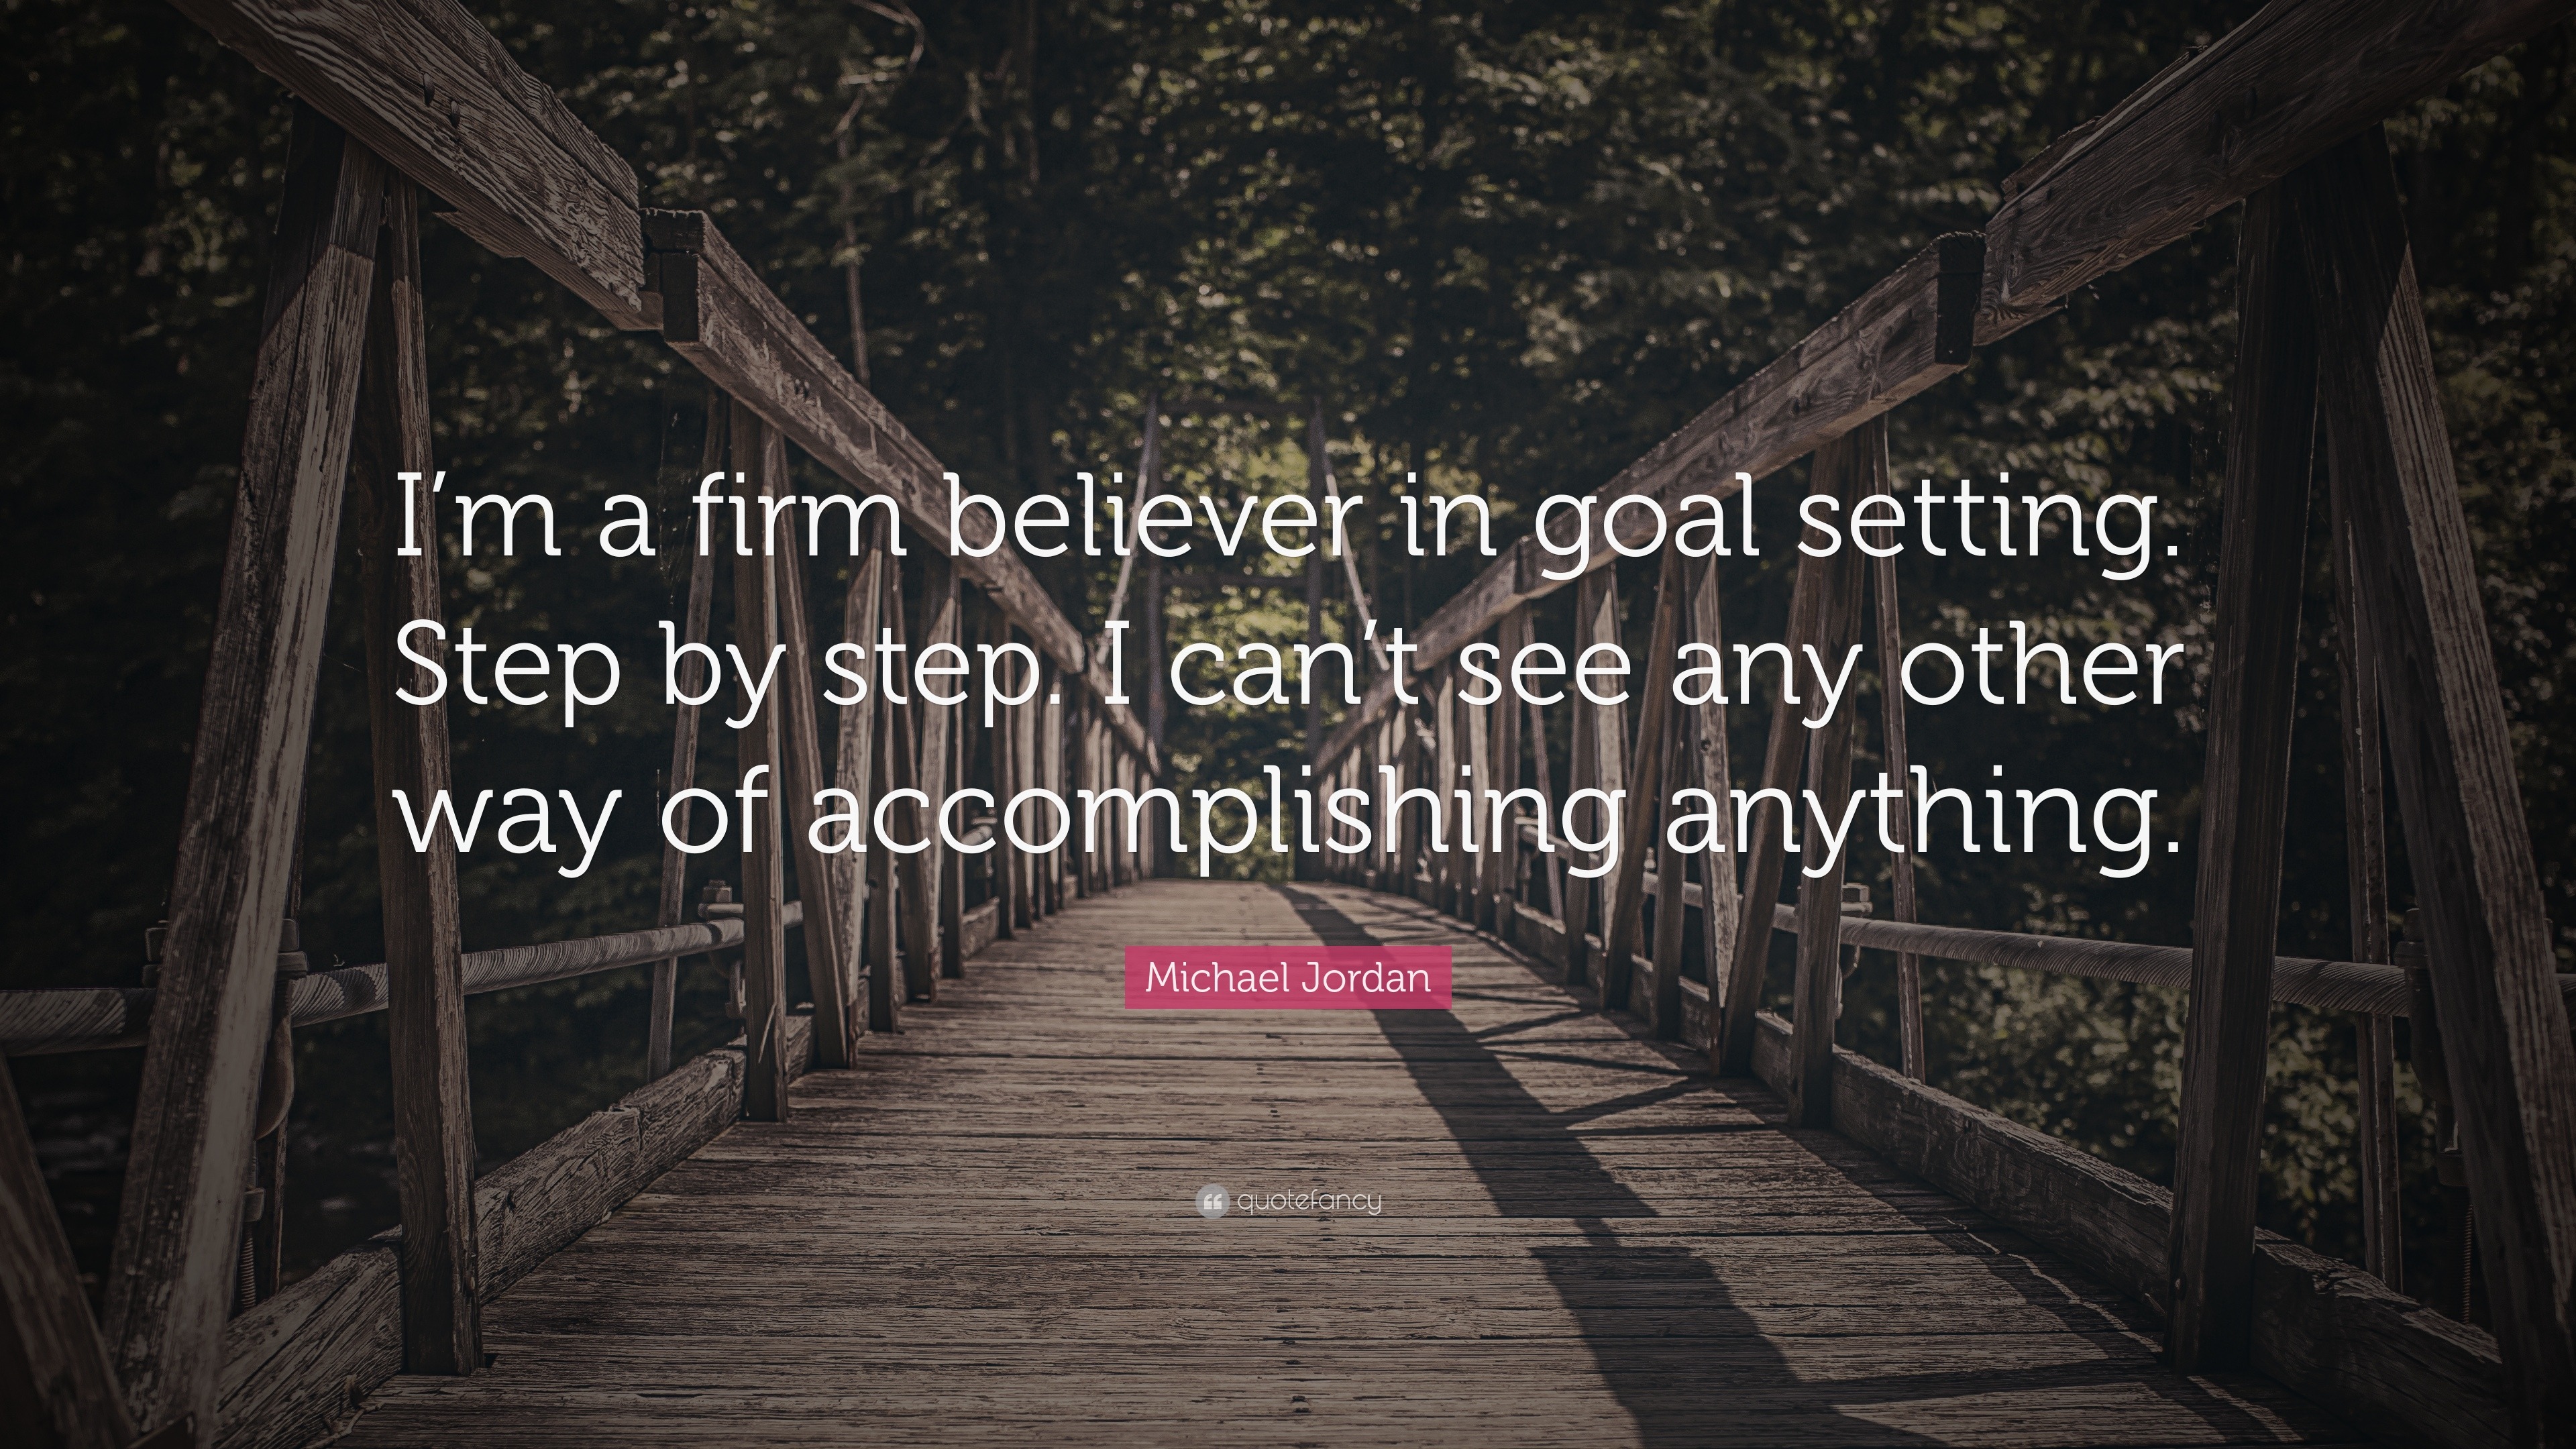 Michael Jordan Quote: “I'm a firm believer in goal setting. Step